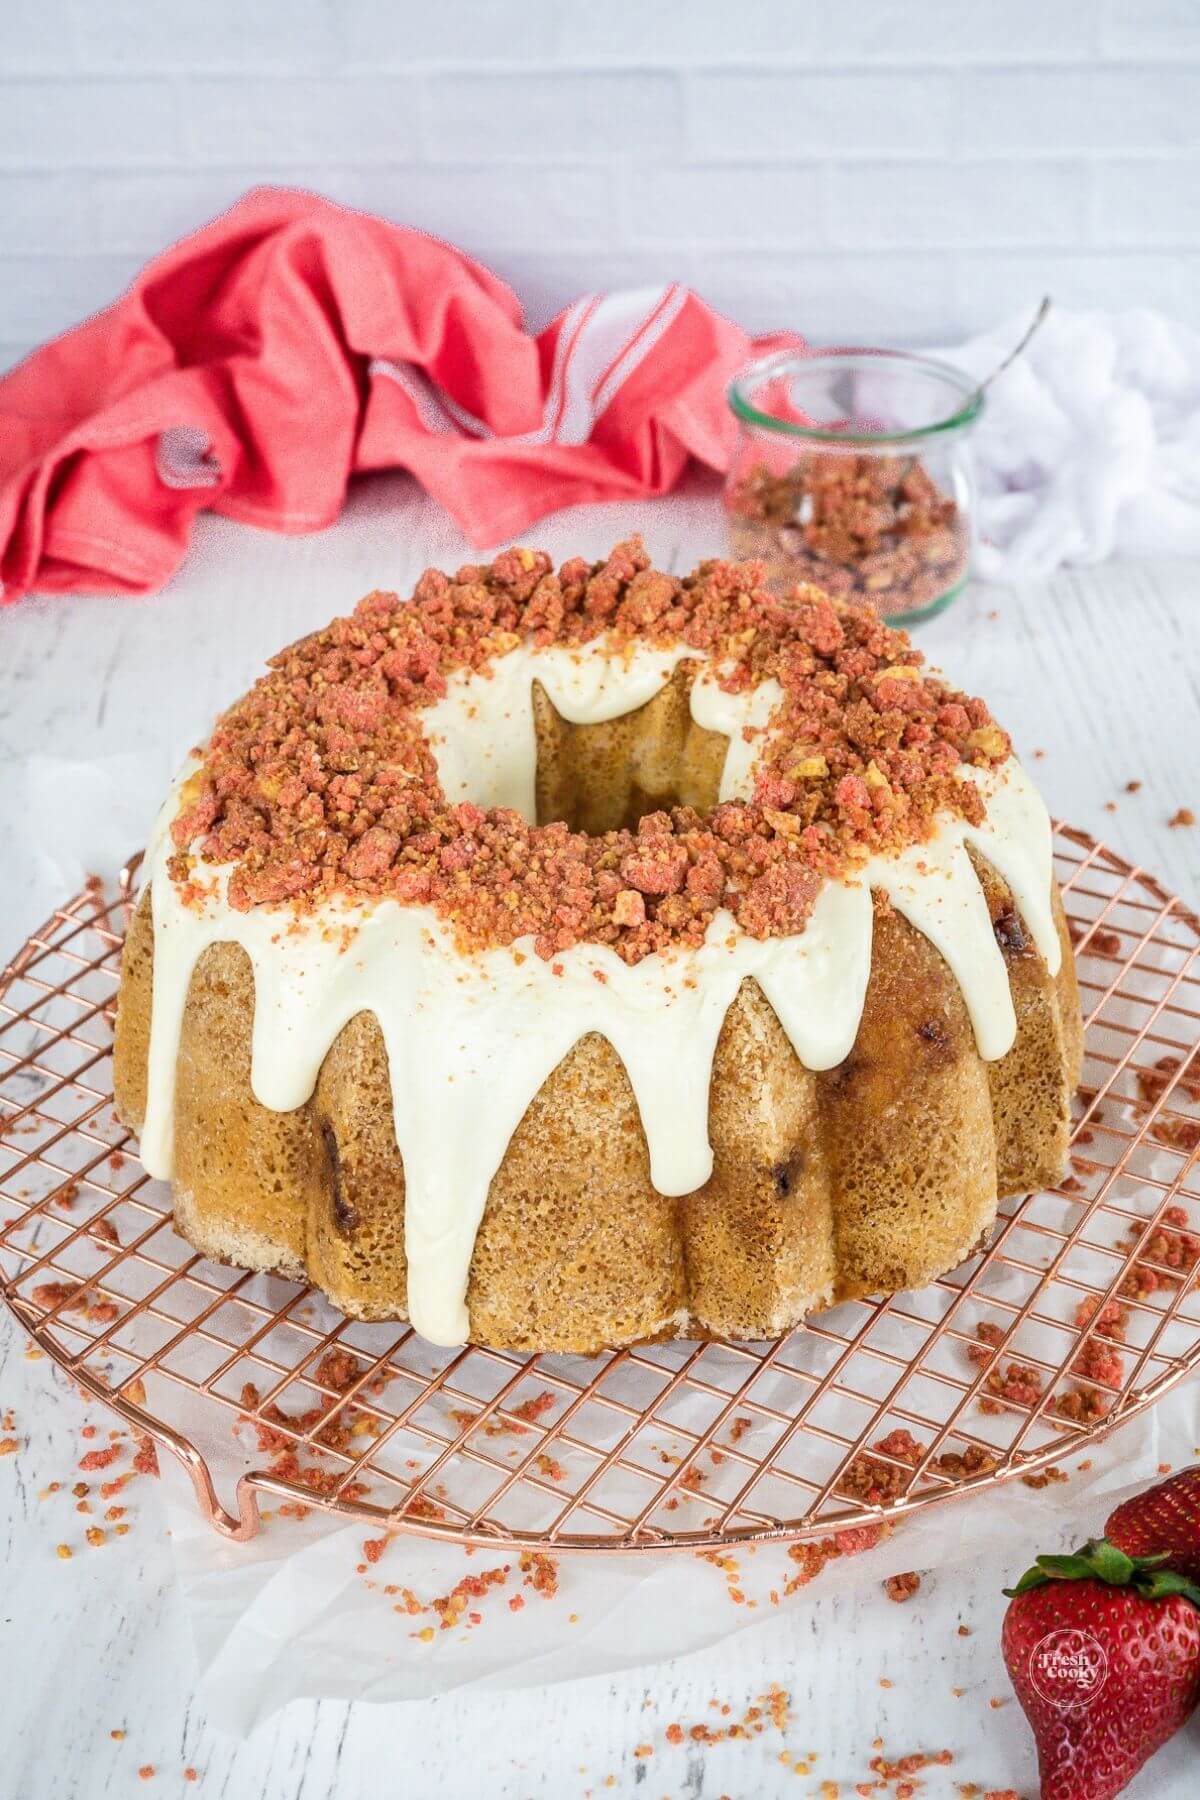 Strawberry Crunch Cake with strawberry crunch topping.